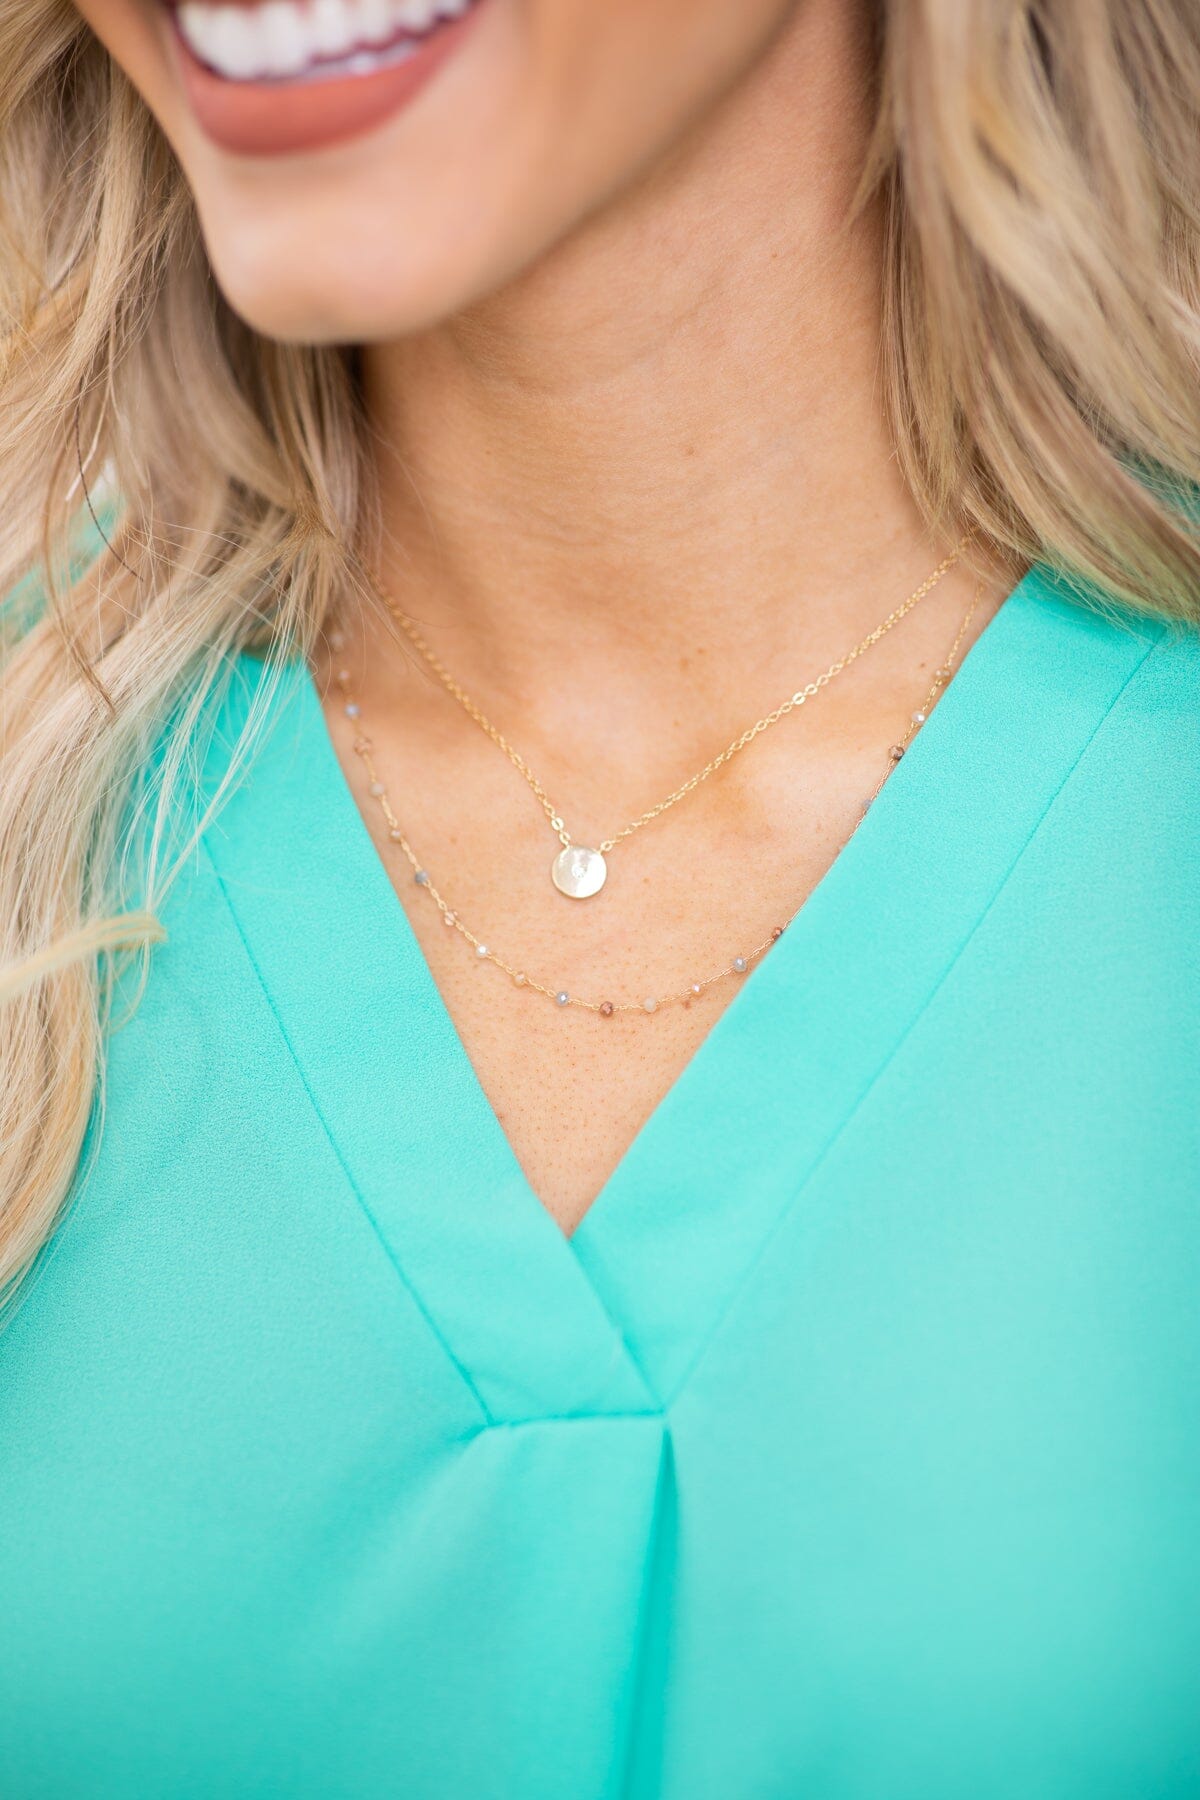 Gold Dainty Layered Chain Necklace - Filly Flair